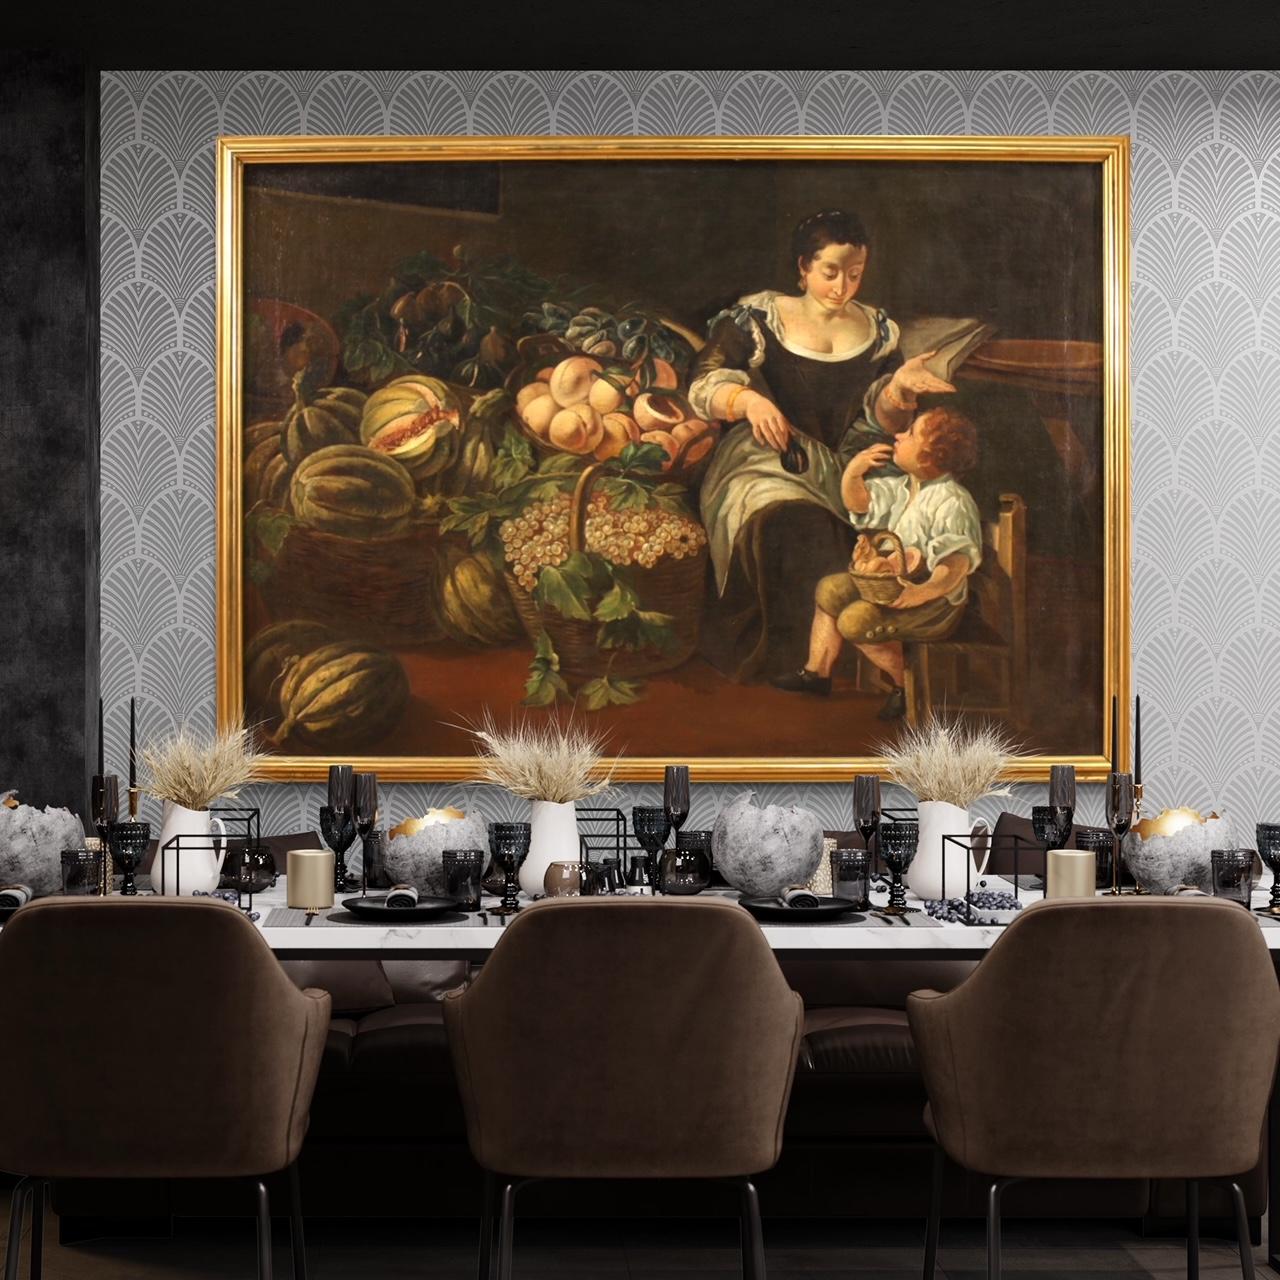 Antique Italian painting from the 18th century. Artwork oil on canvas depicting a genre scene with greengrocer and still life of good pictorial quality. Painting of exceptional size and impact adorned with a modern carved and gilded frame of